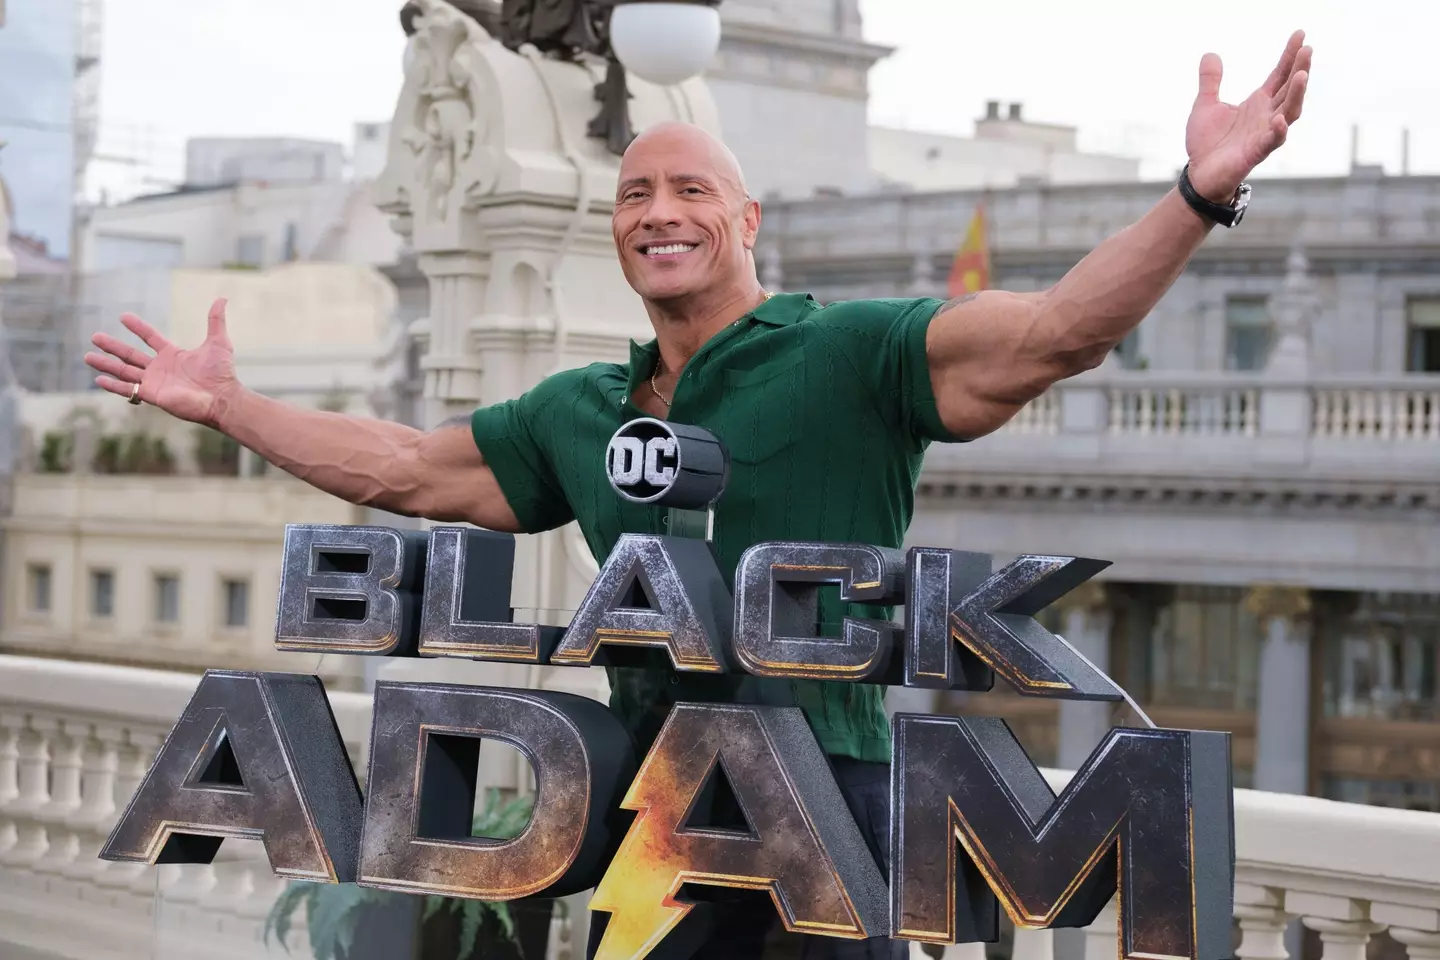 Dwayne Johnson even admitted that the joke was 'horrible'.